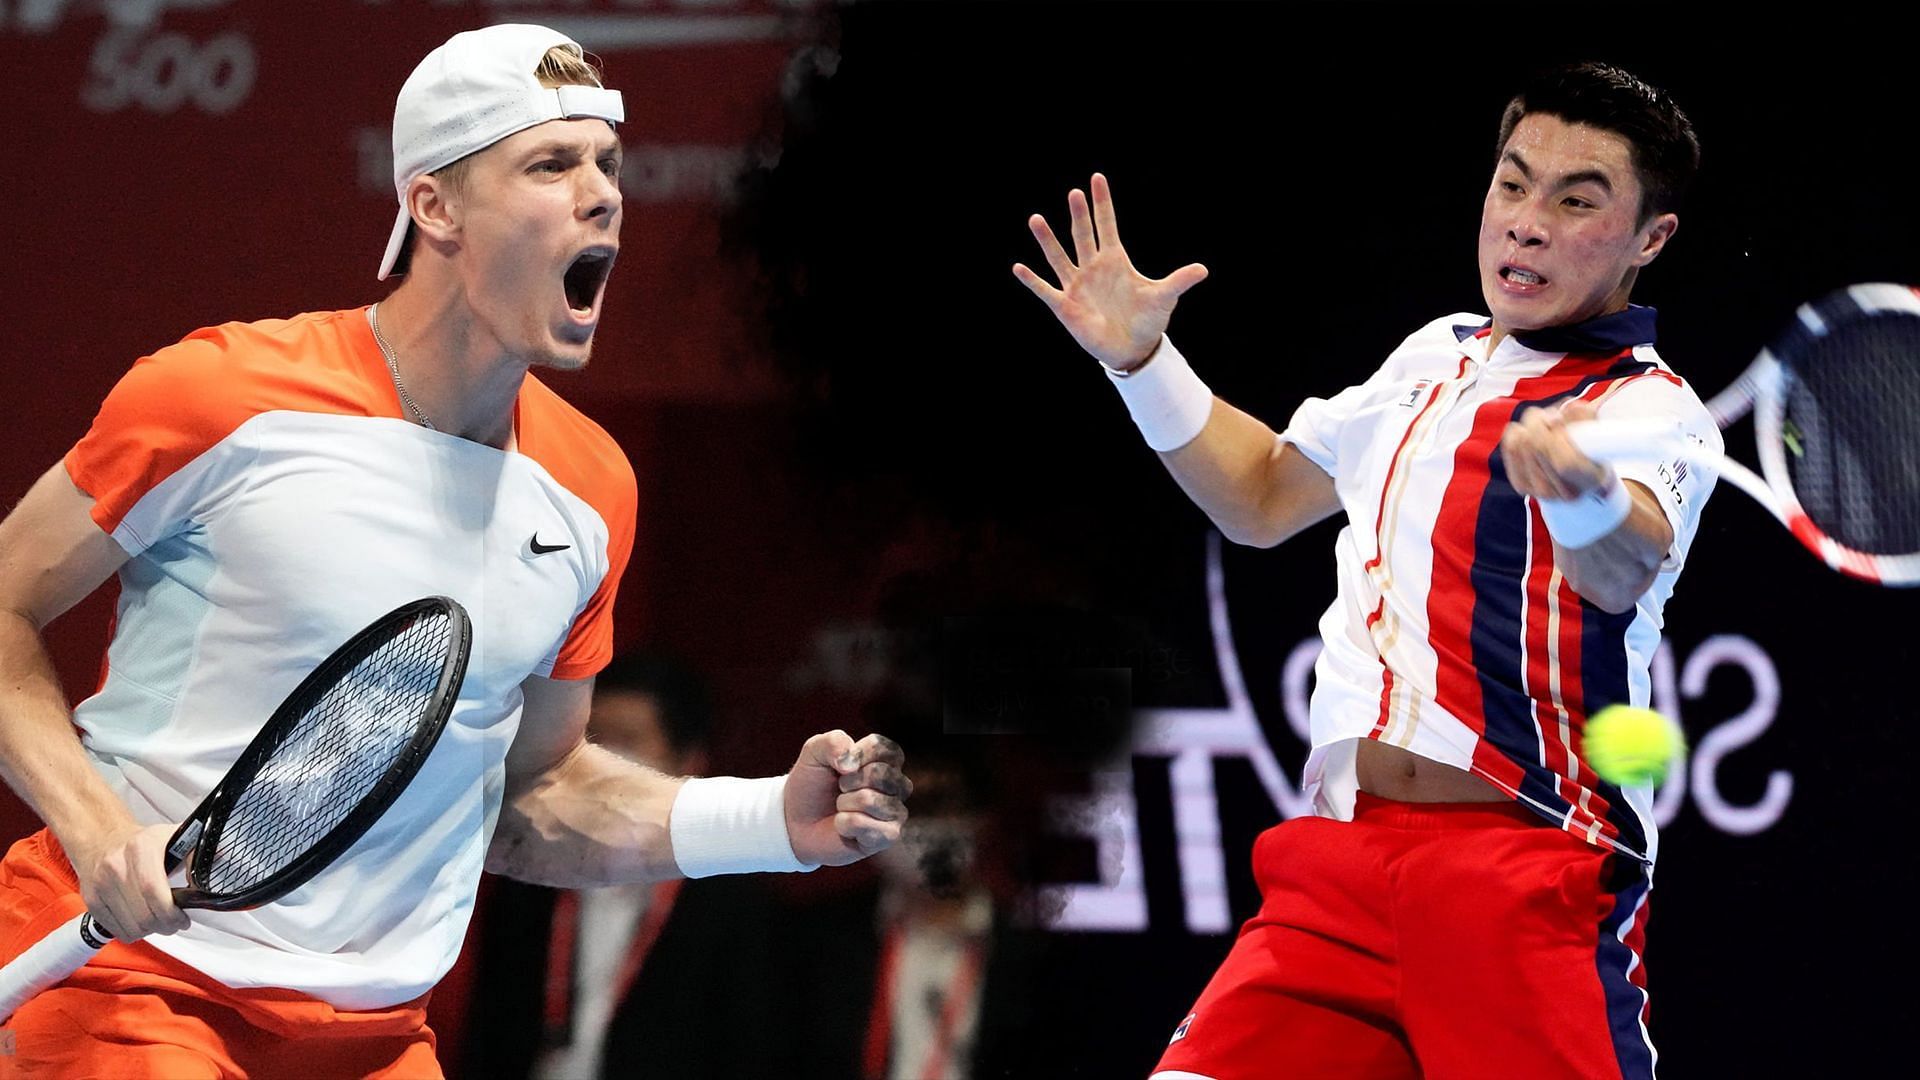 Denis Shapovalov vs Brandon Nakashima is one of the first-round matches at the French Open.